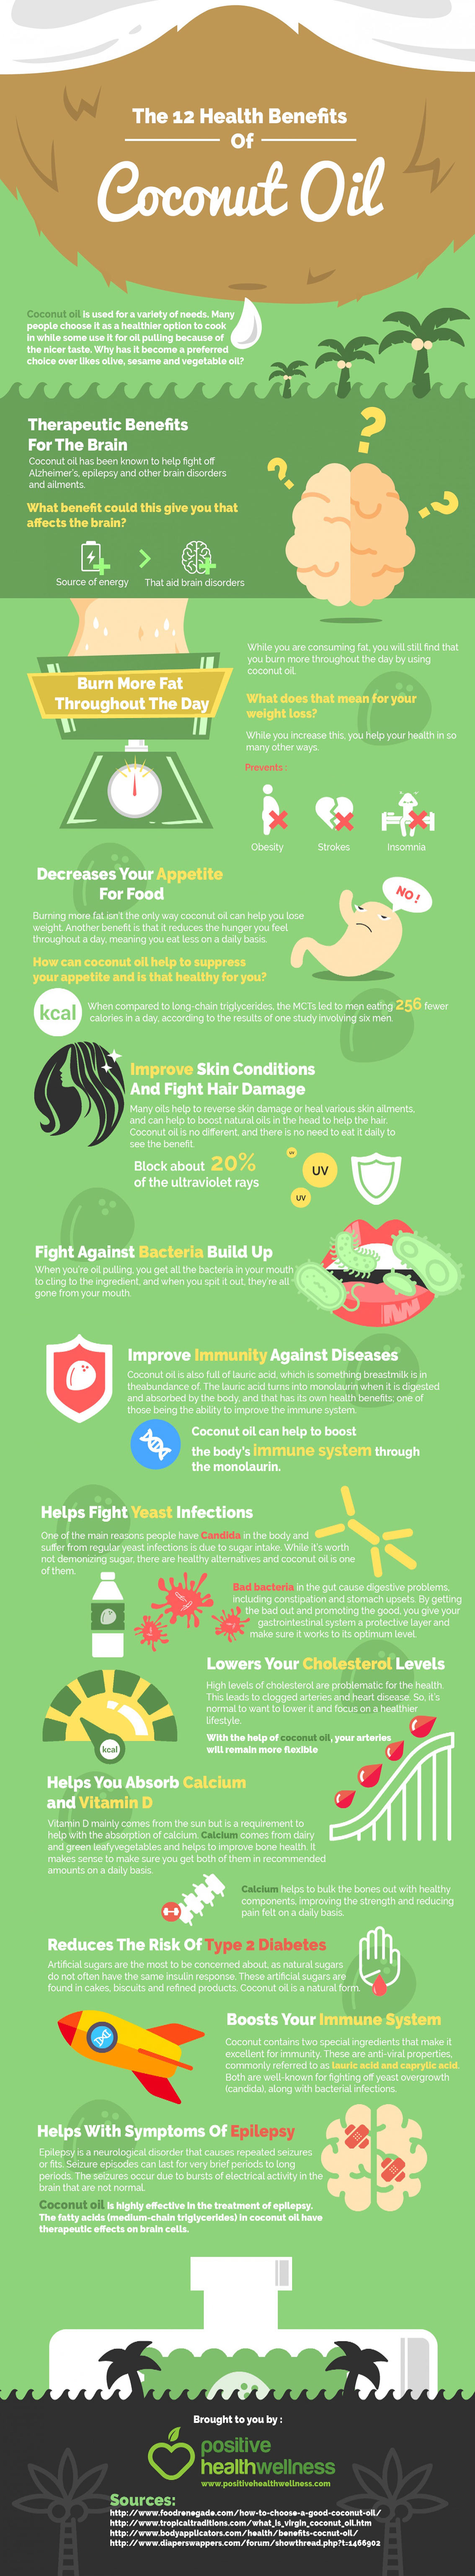 Health Benefits of Coconut Oil Infographic